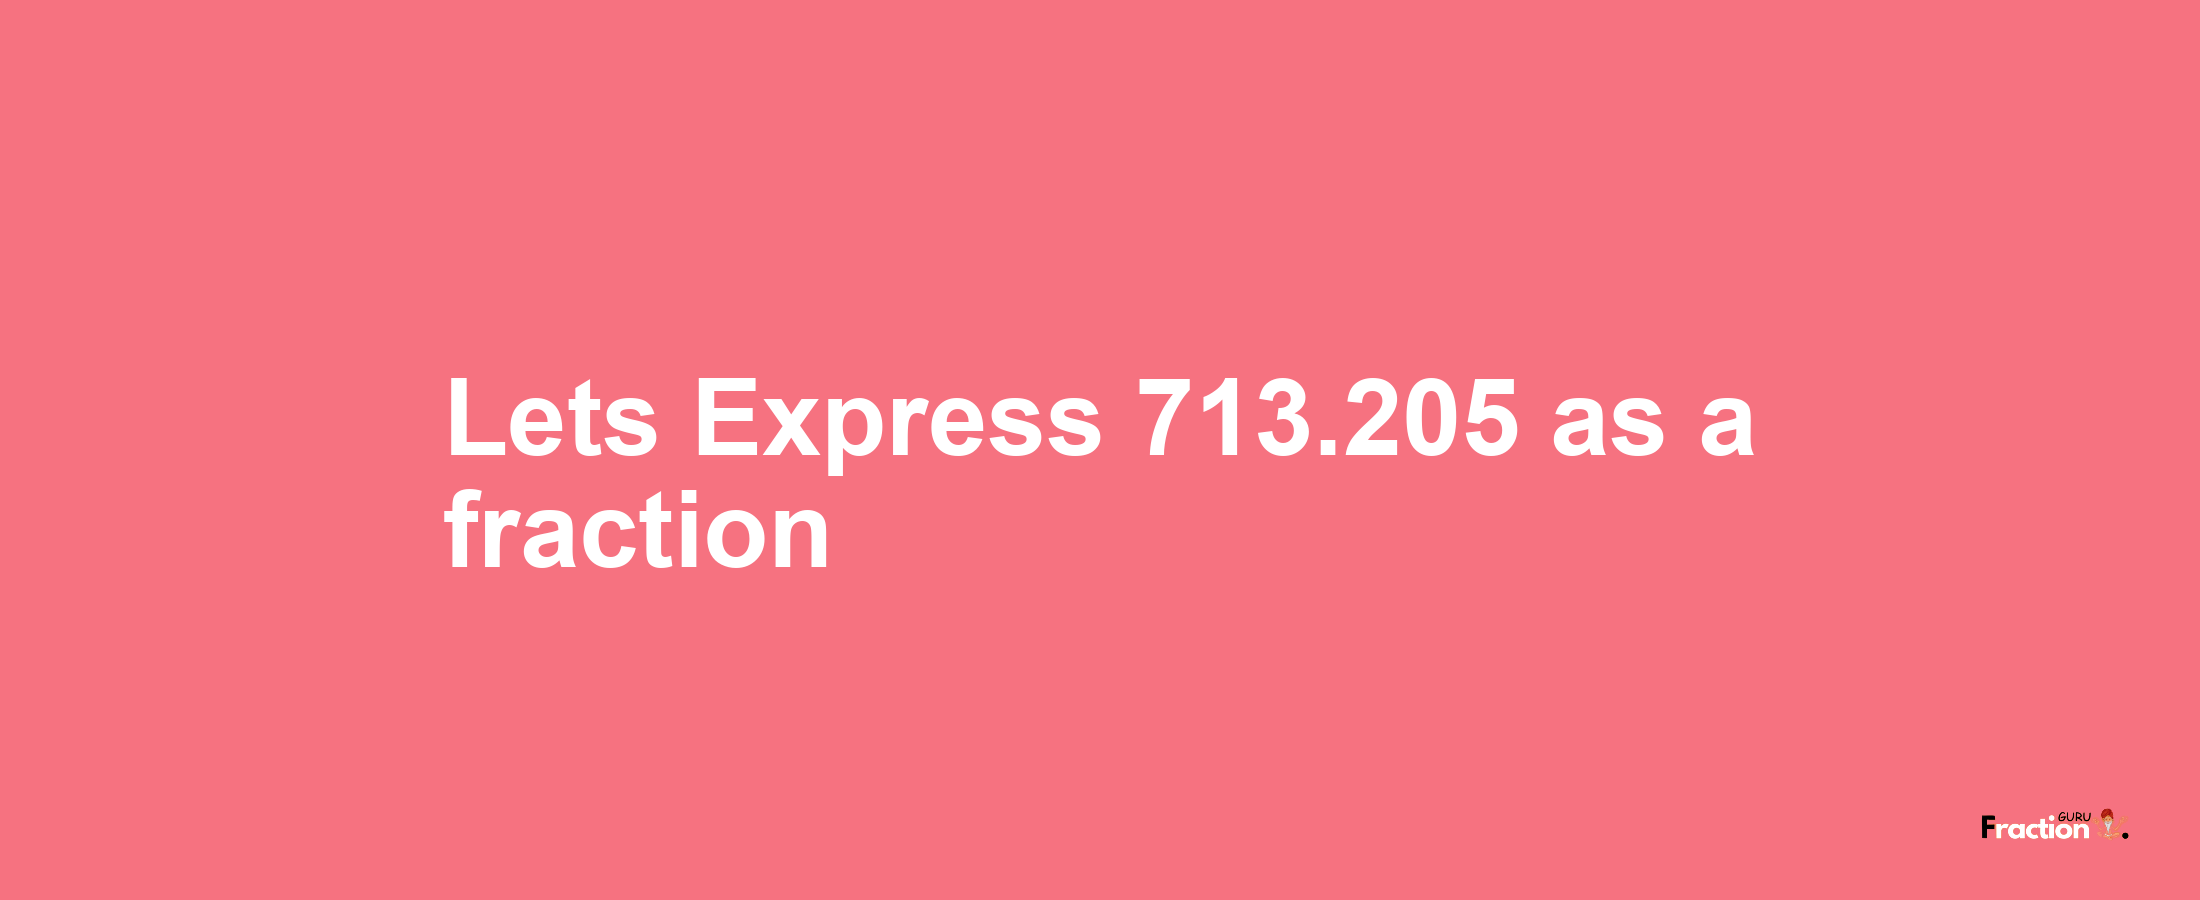 Lets Express 713.205 as afraction